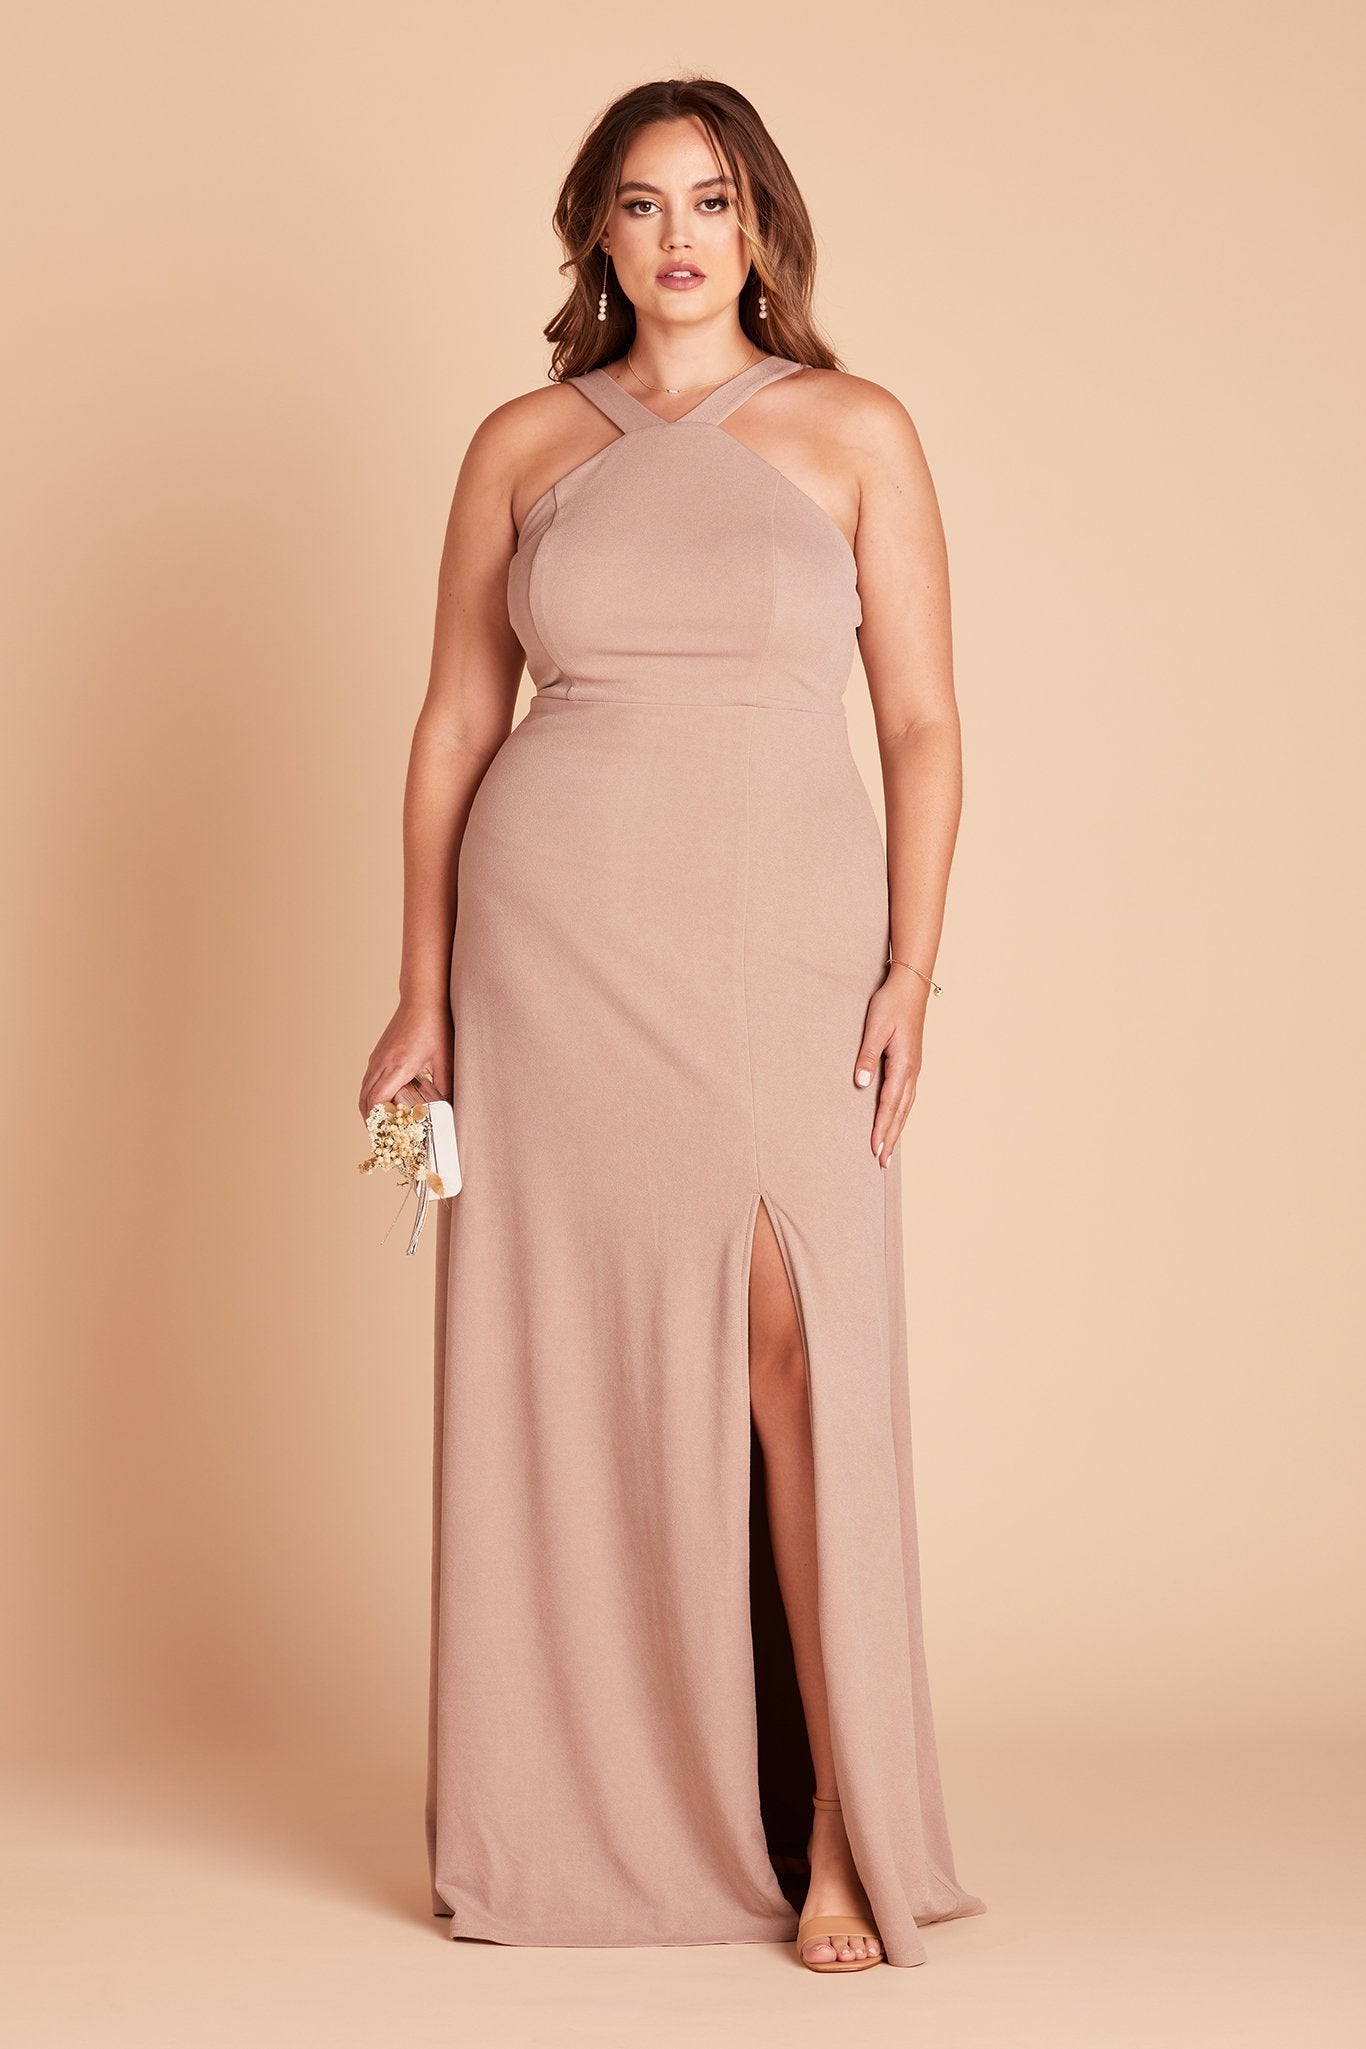 Gene plus size bridesmaid dress with slit in taupe crepe by Birdy Grey, front view